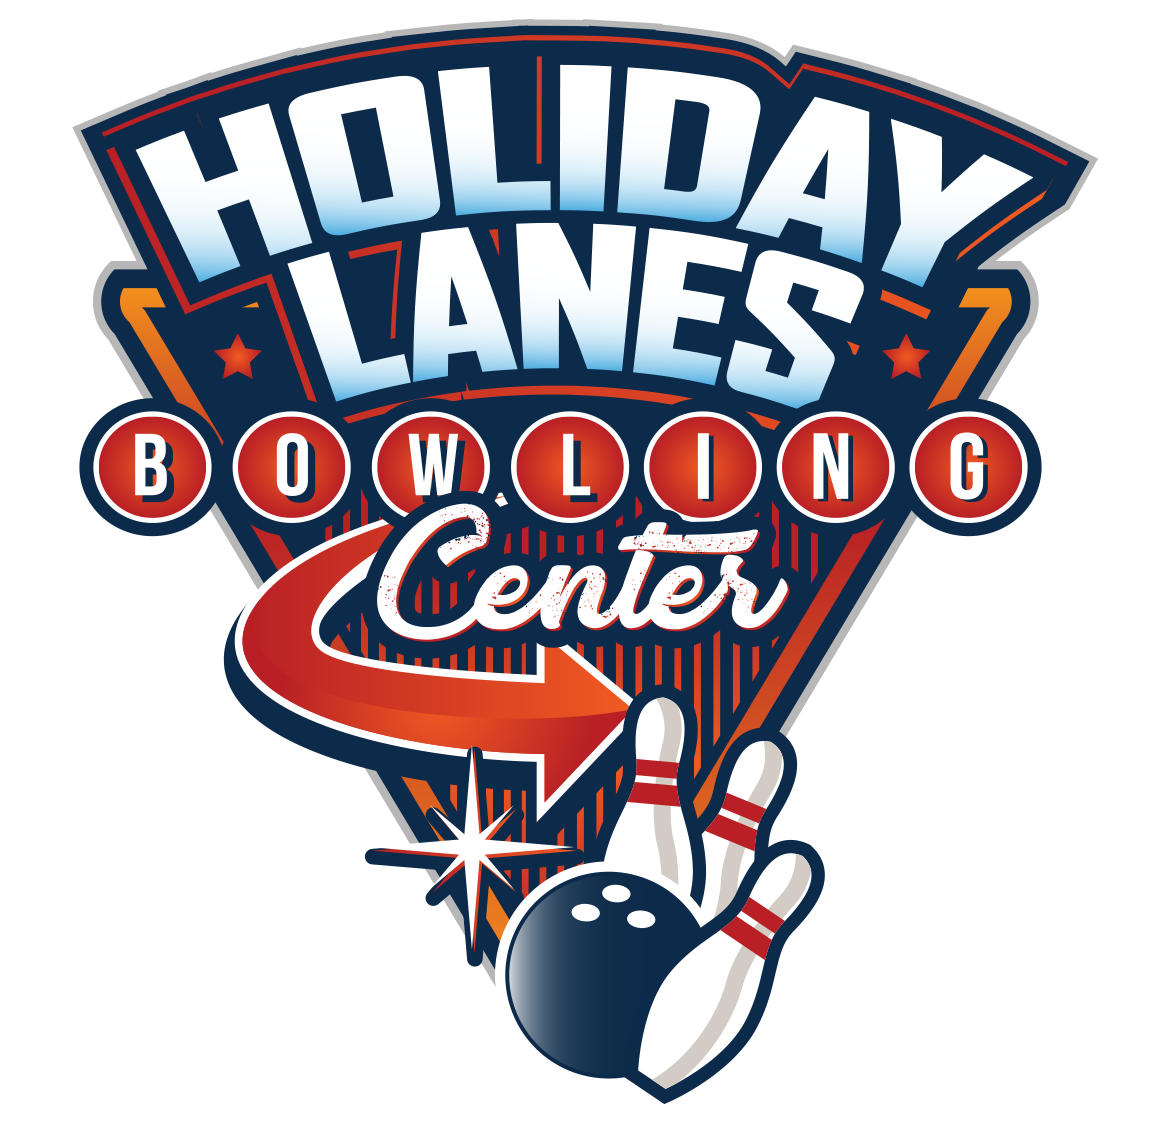 Holiday Lanes Bowling Center